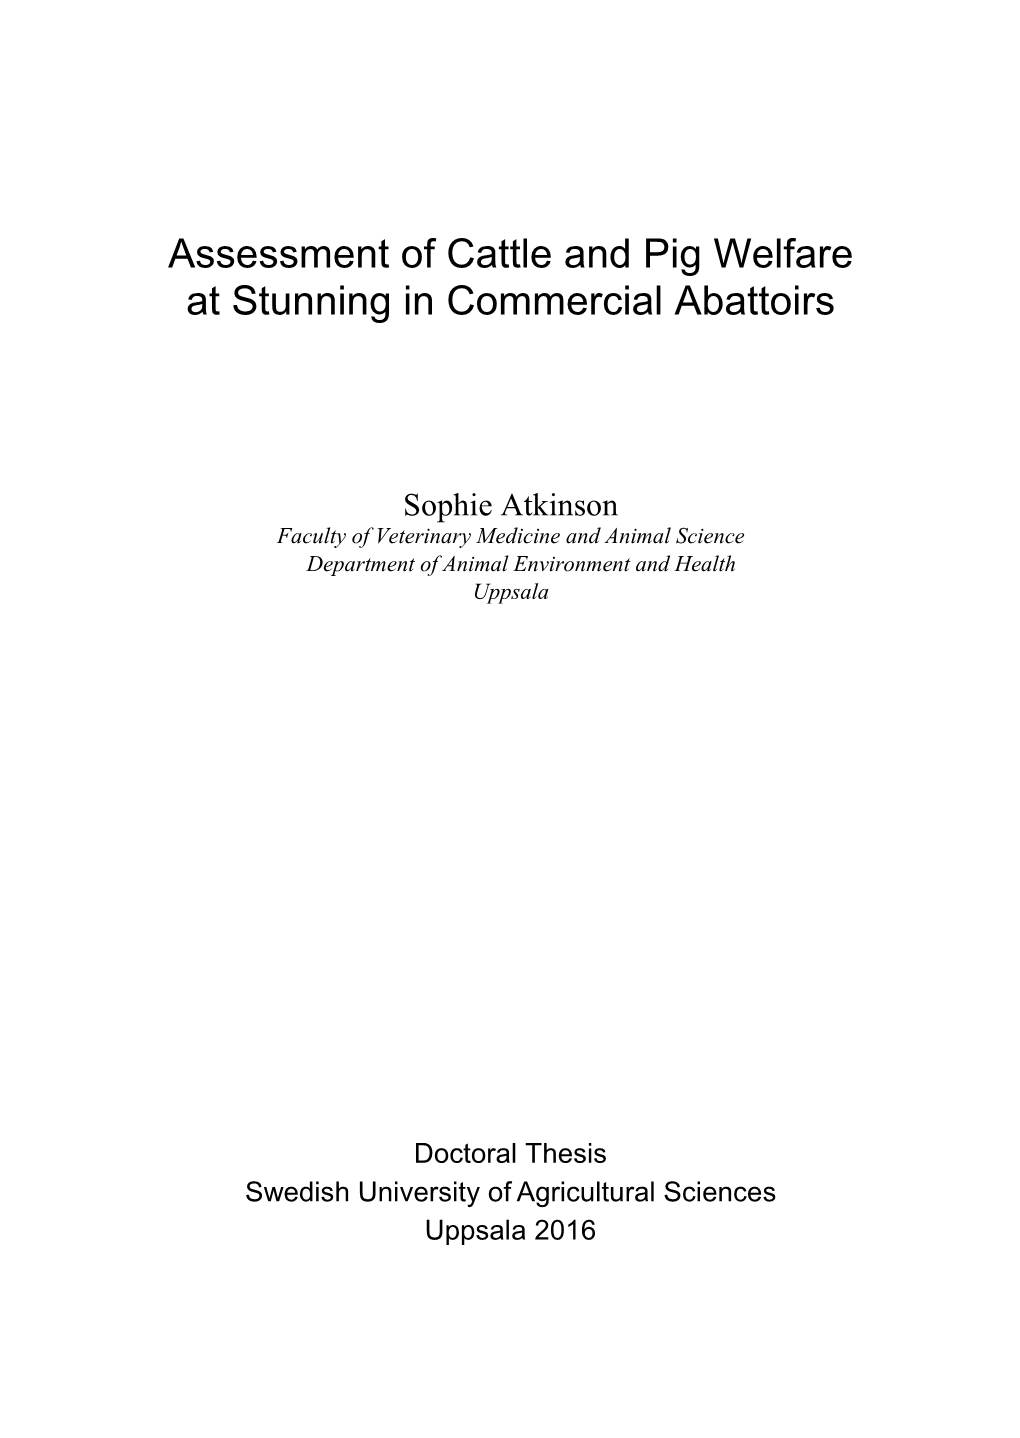 Assessment of Cattle and Pig Welfare at Stunning in Commercial Abattoirs